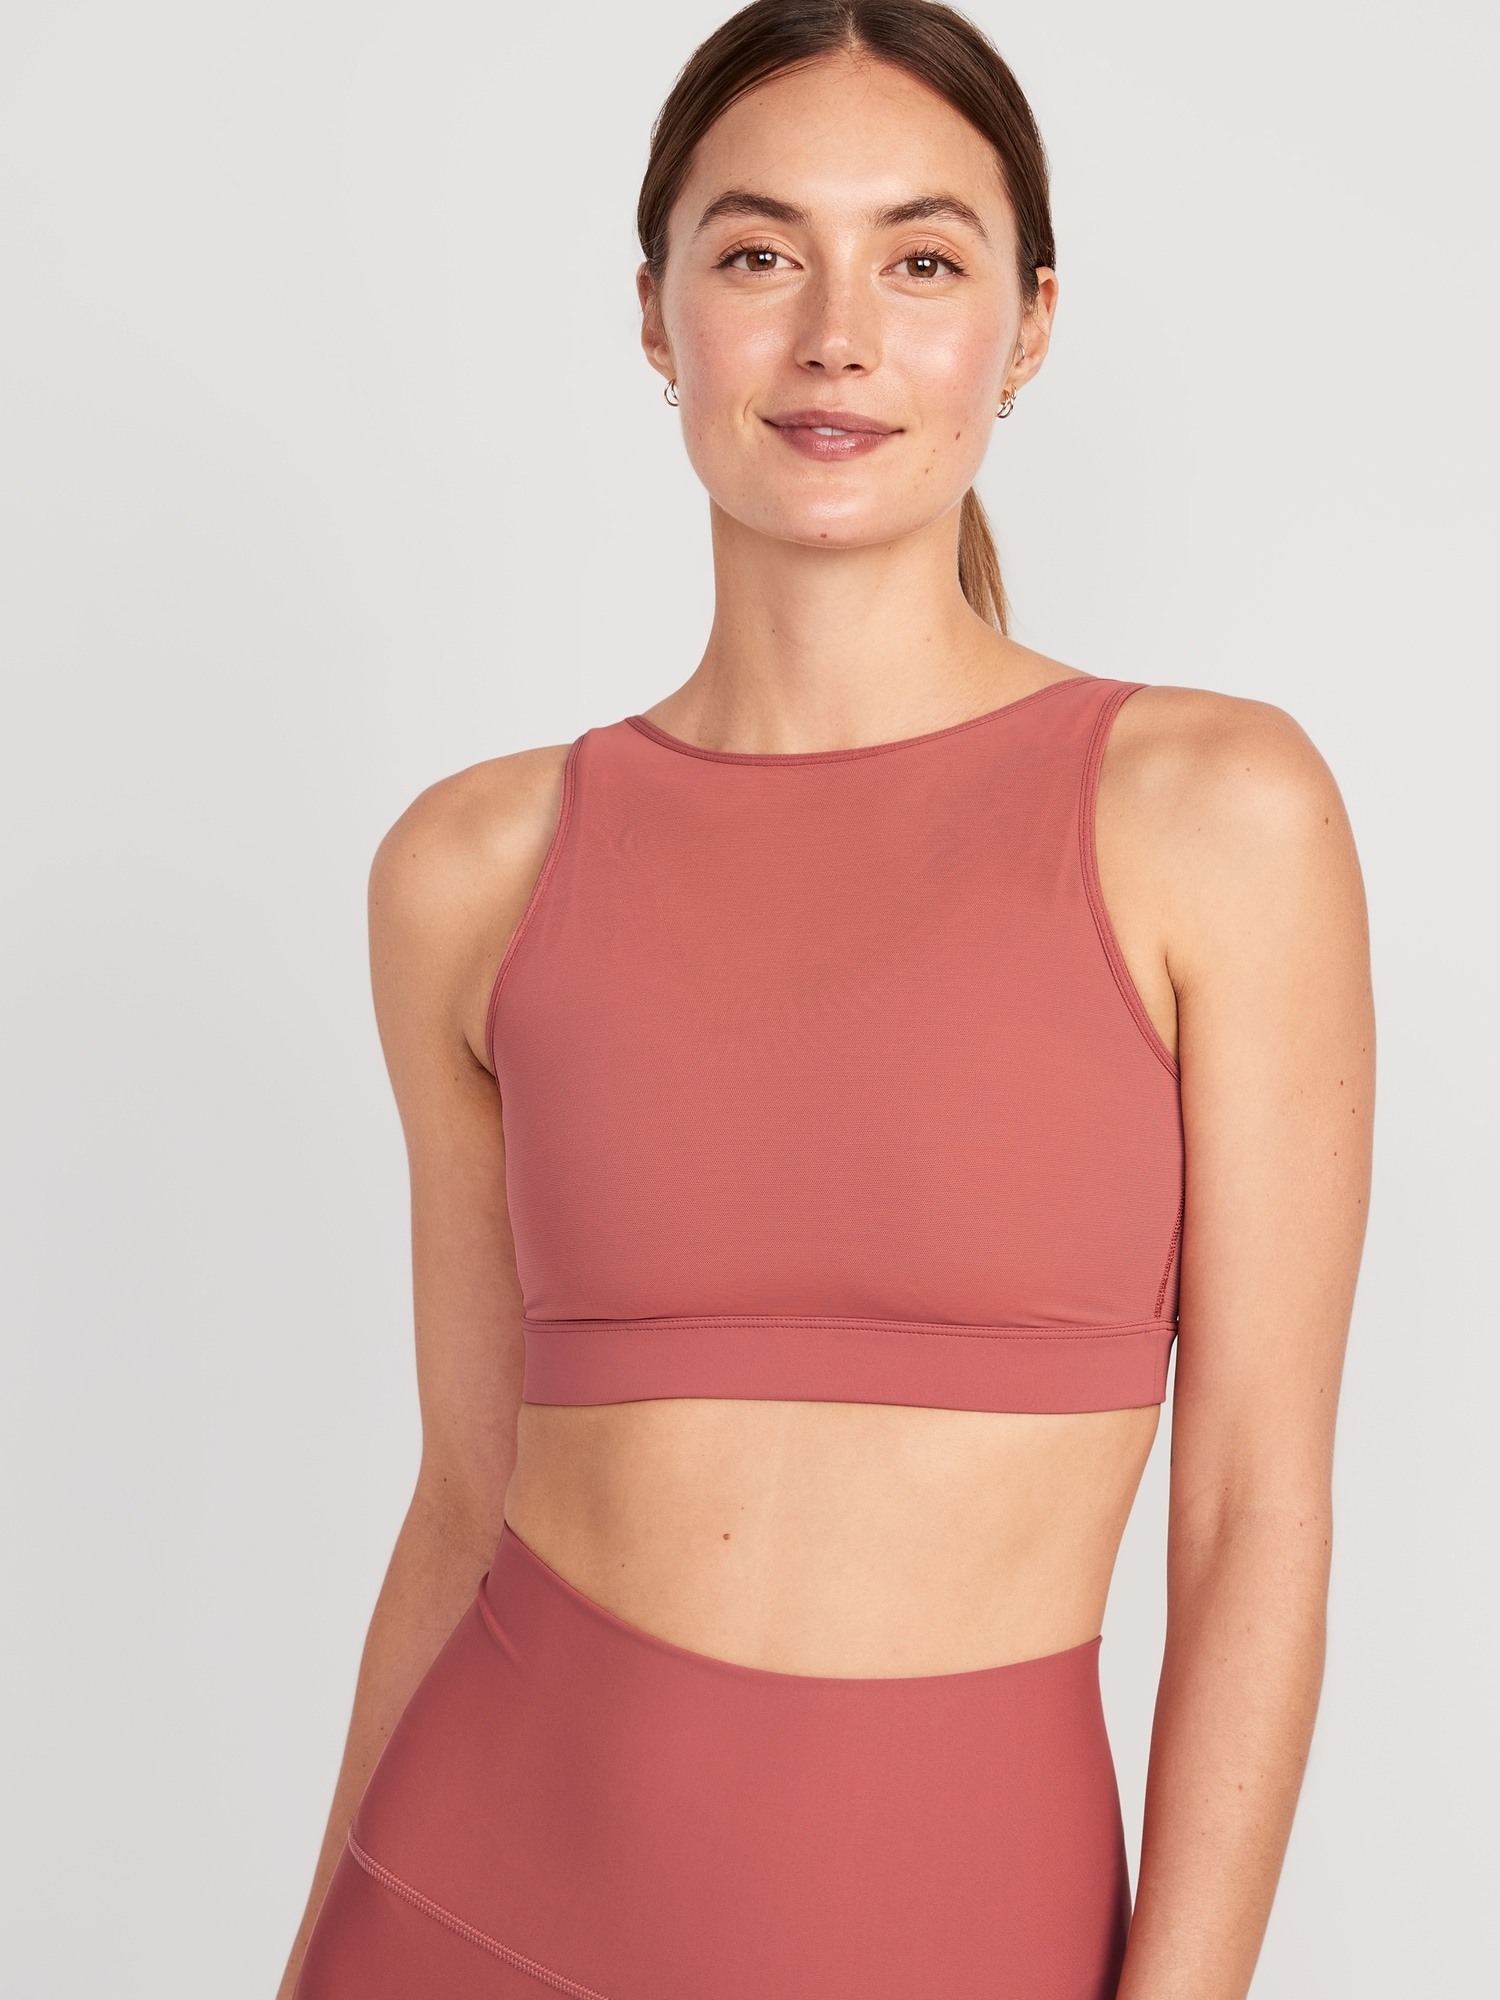 Old Navy Medium Support PowerSoft Layered-Mesh Sports Bra for Women pink. 1